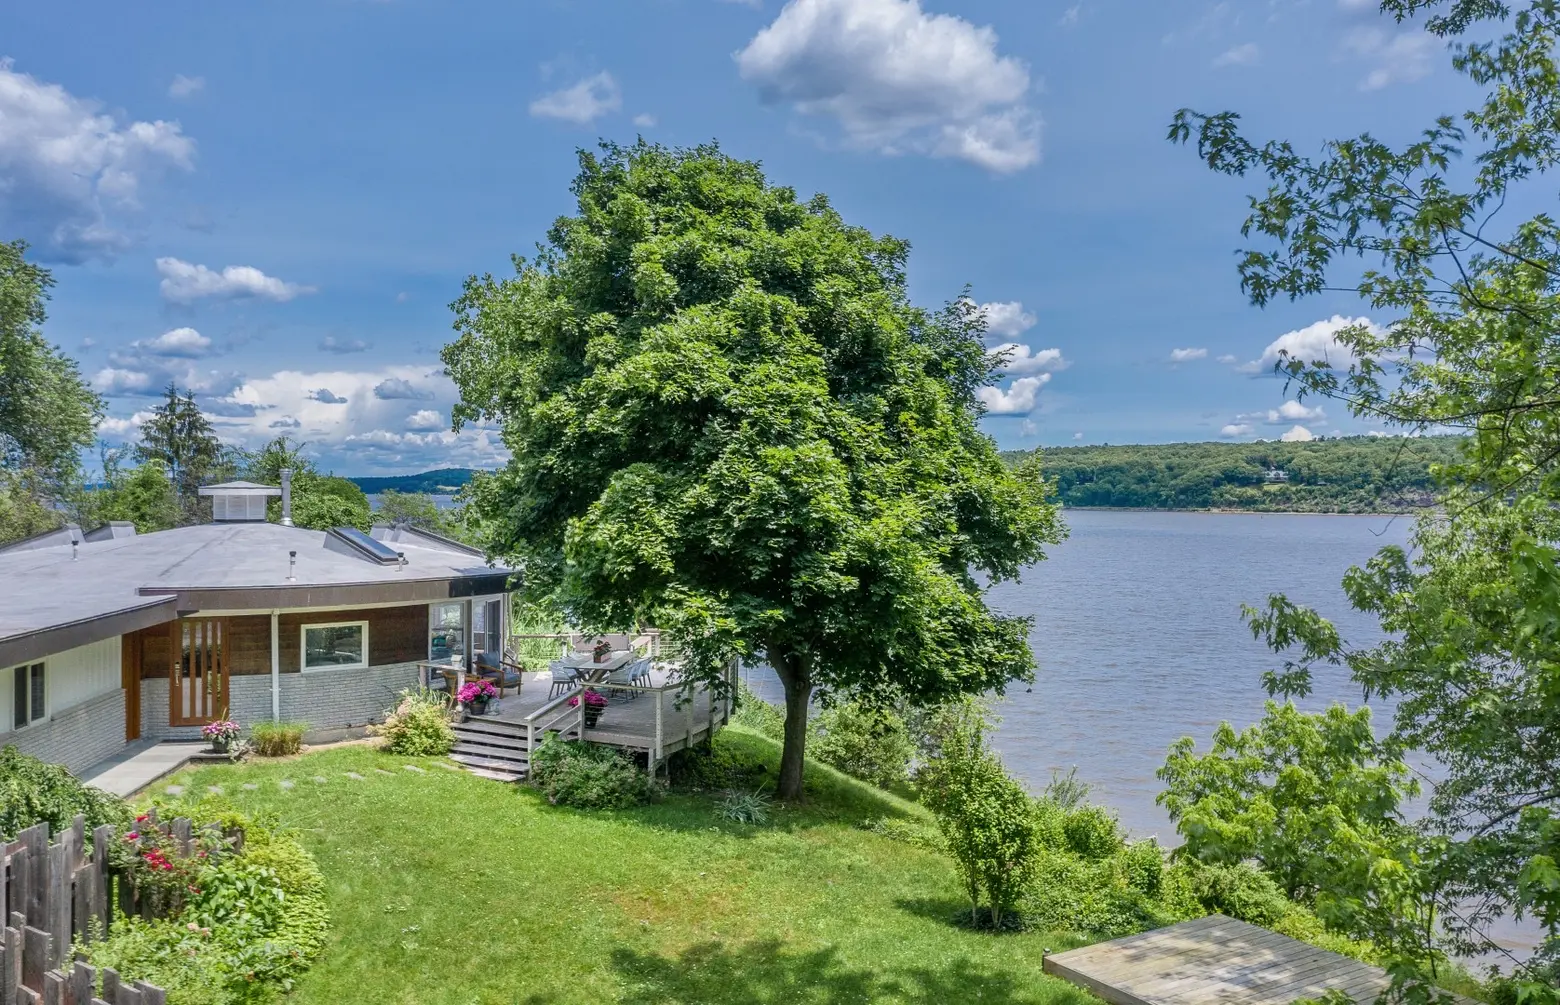 ‘Real Housewife’ Luann de Lesseps lists her Catskills round house for $1.15M